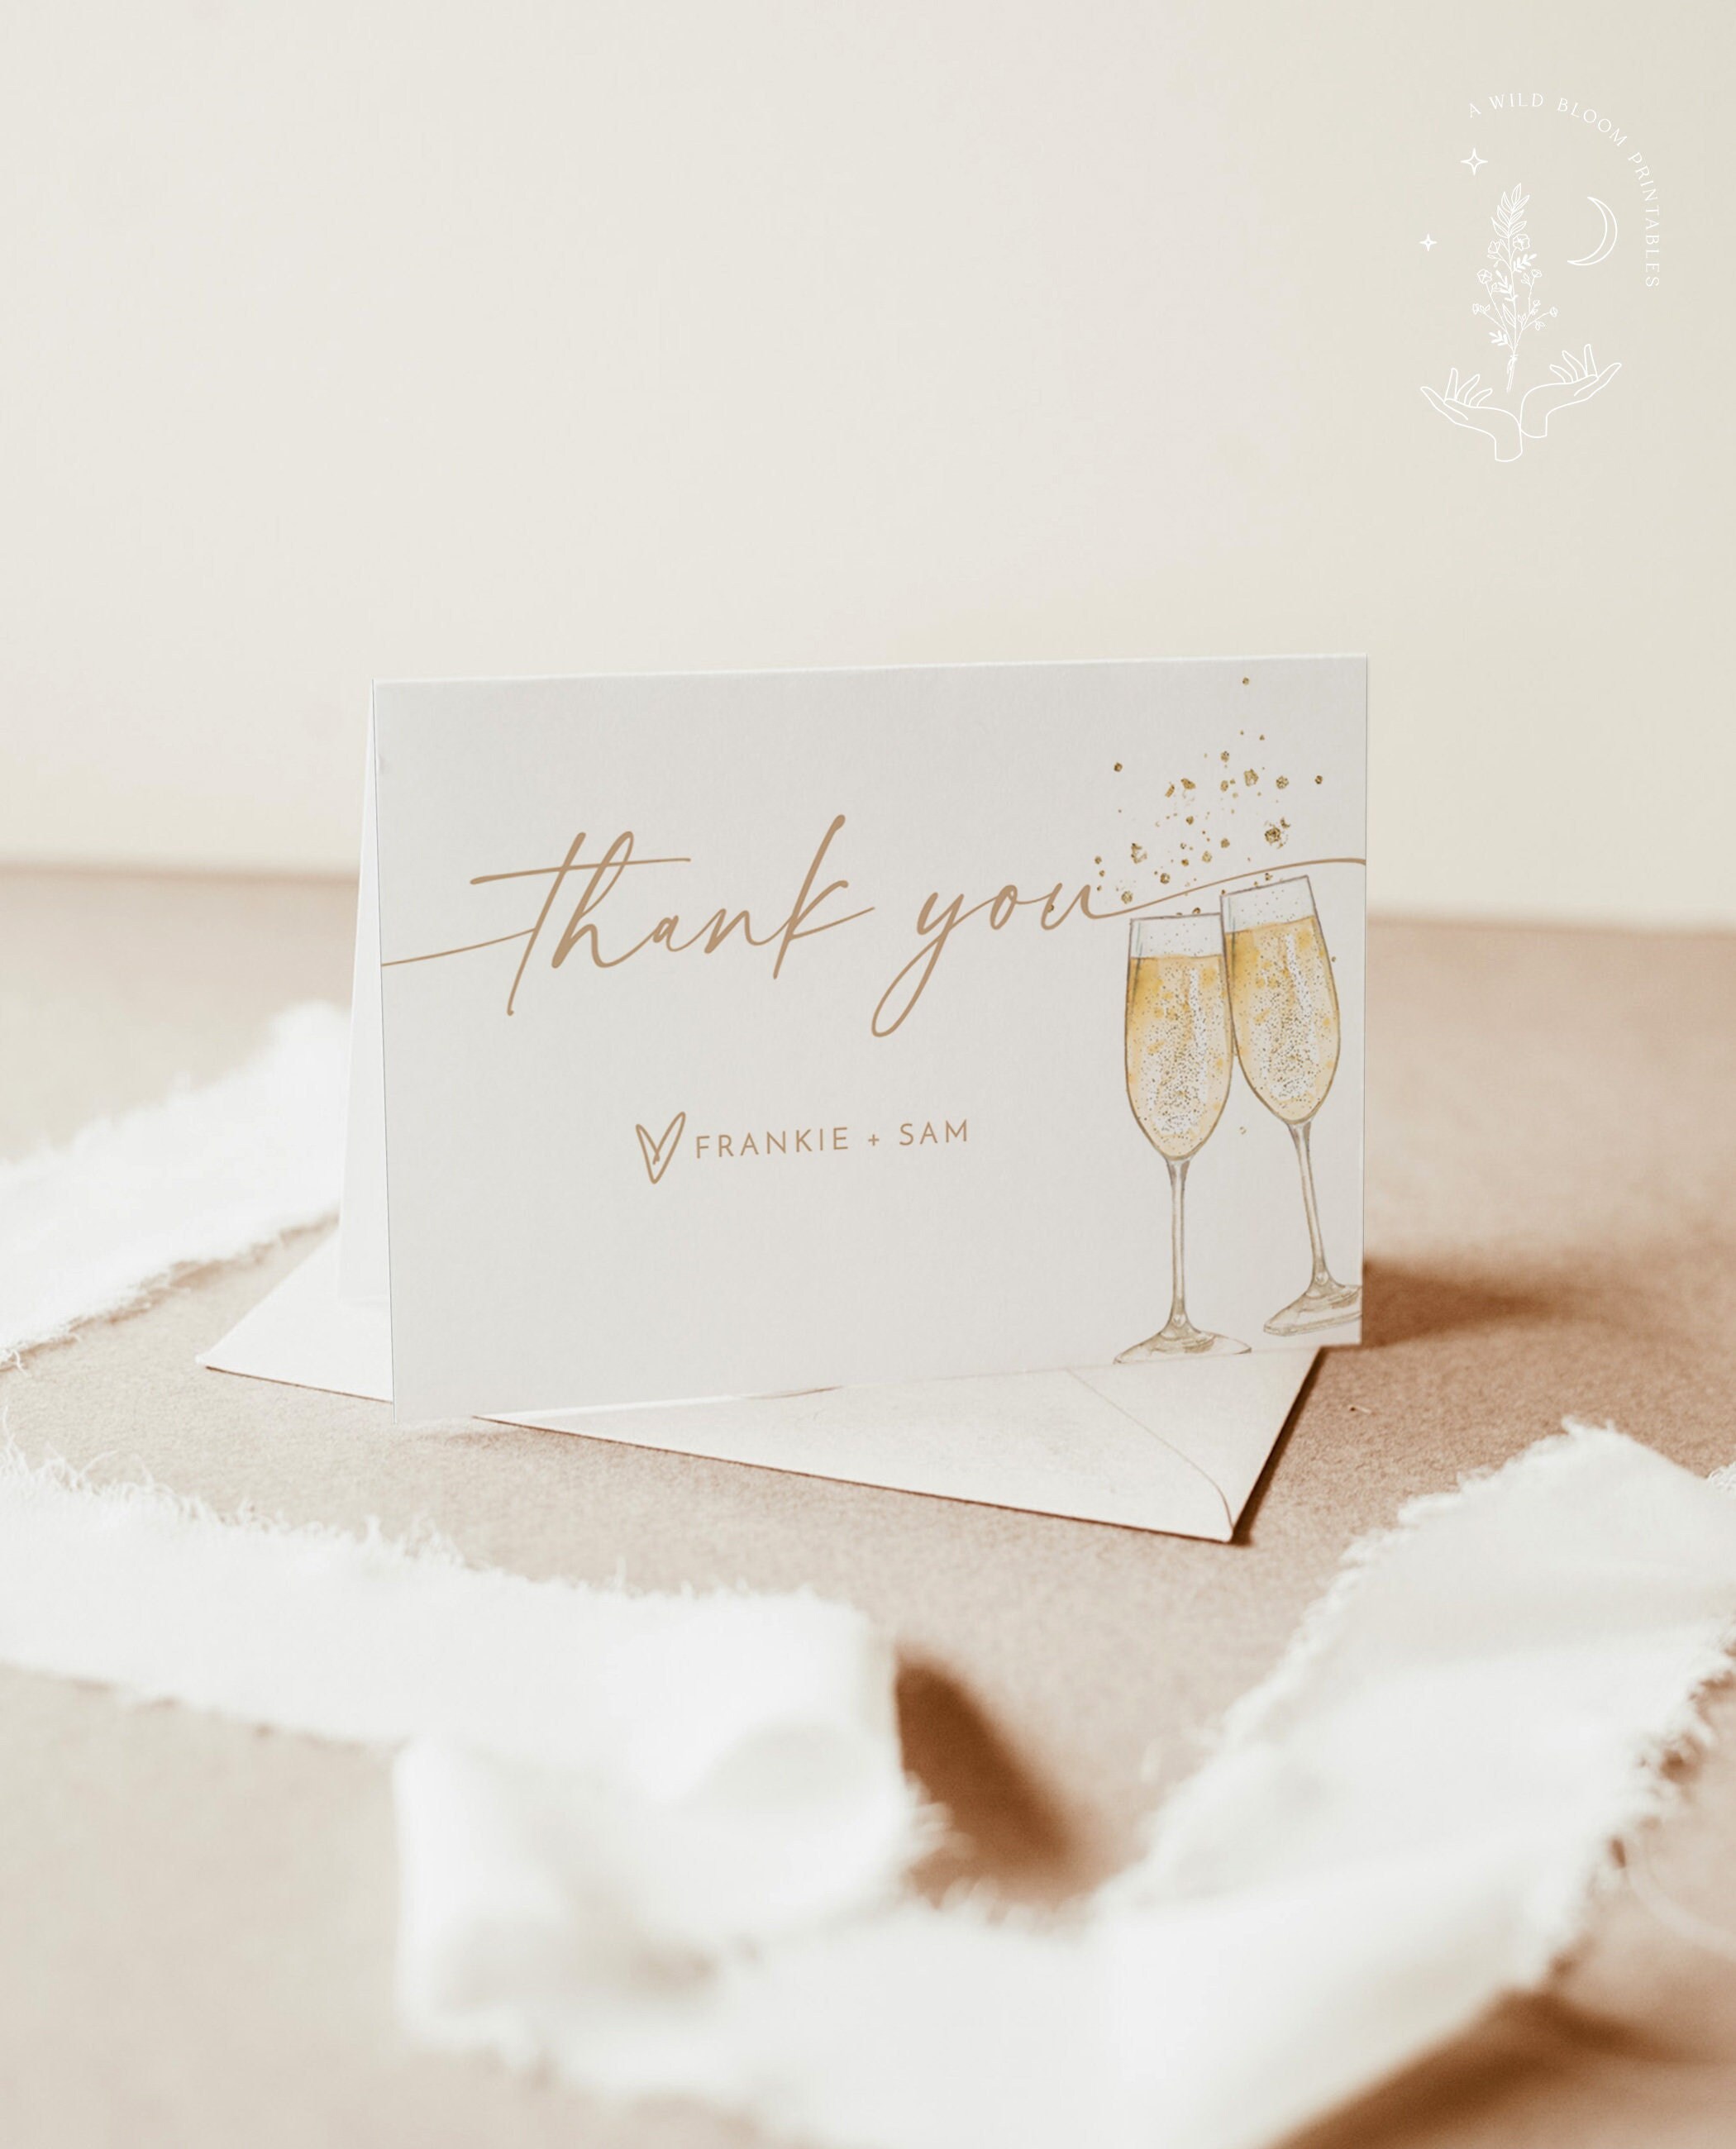 Personalized Thank You Tag, Wedding Thank You Tags, Gift Tags, Wedding  Favor, Thank You, Corporate Gifts Printed with FREE SHIPPING TPC9070